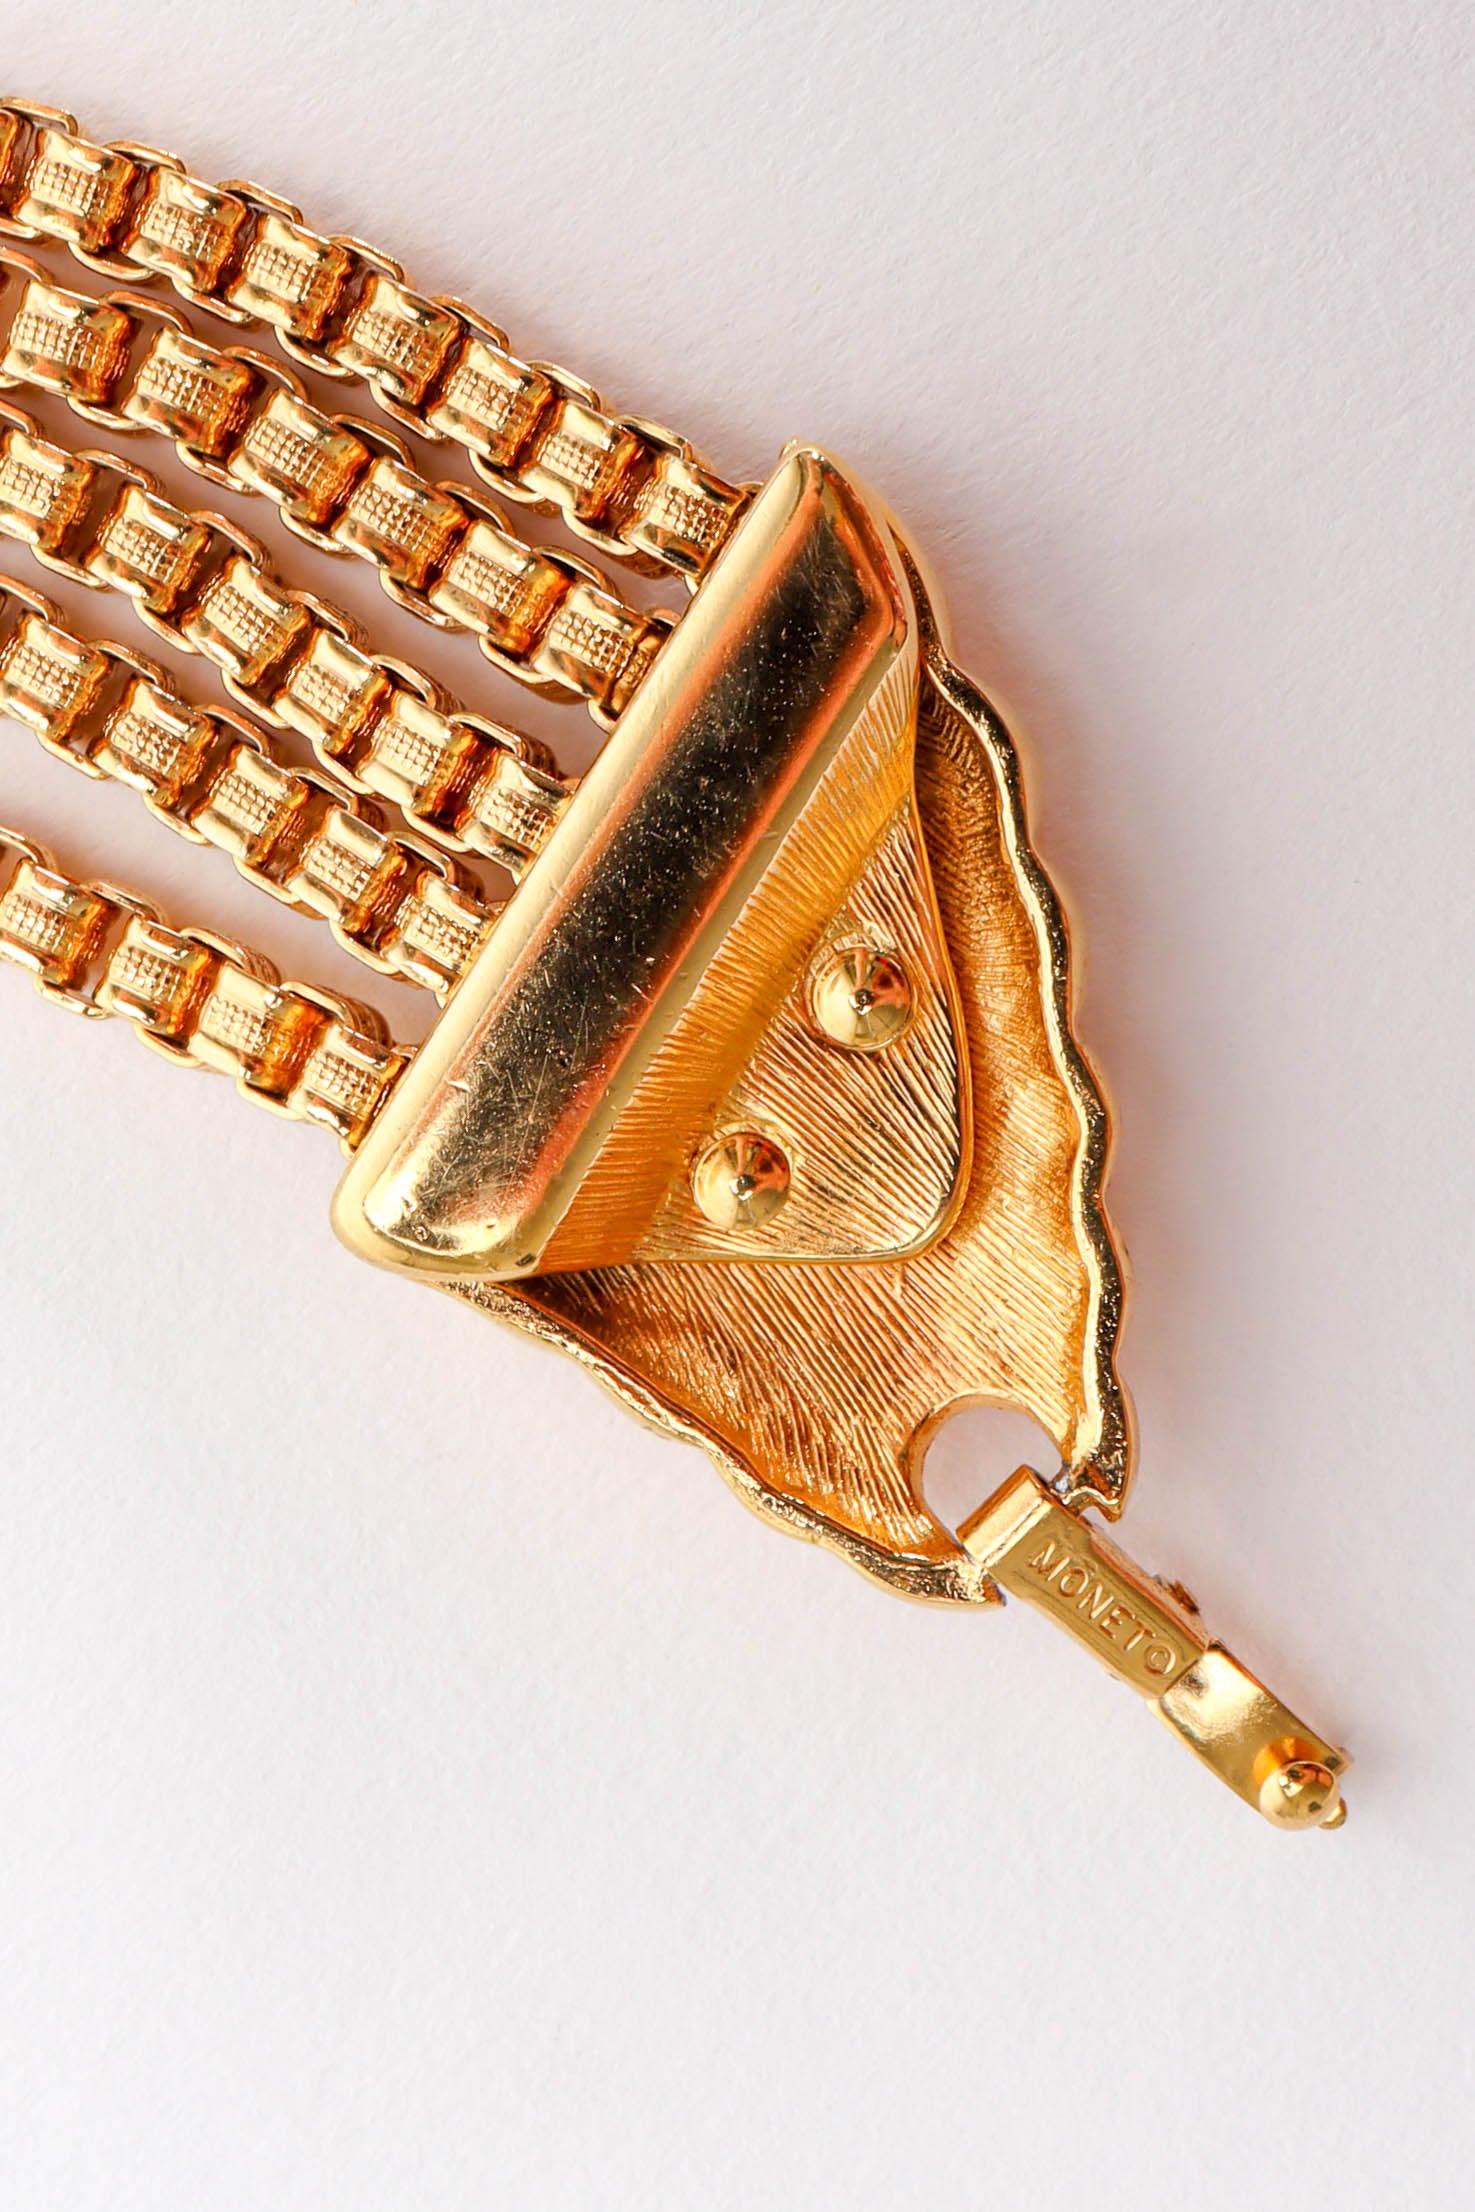 Vintage Monet Scalloped Wing Necklace fold over clasp detail @ Recess LA